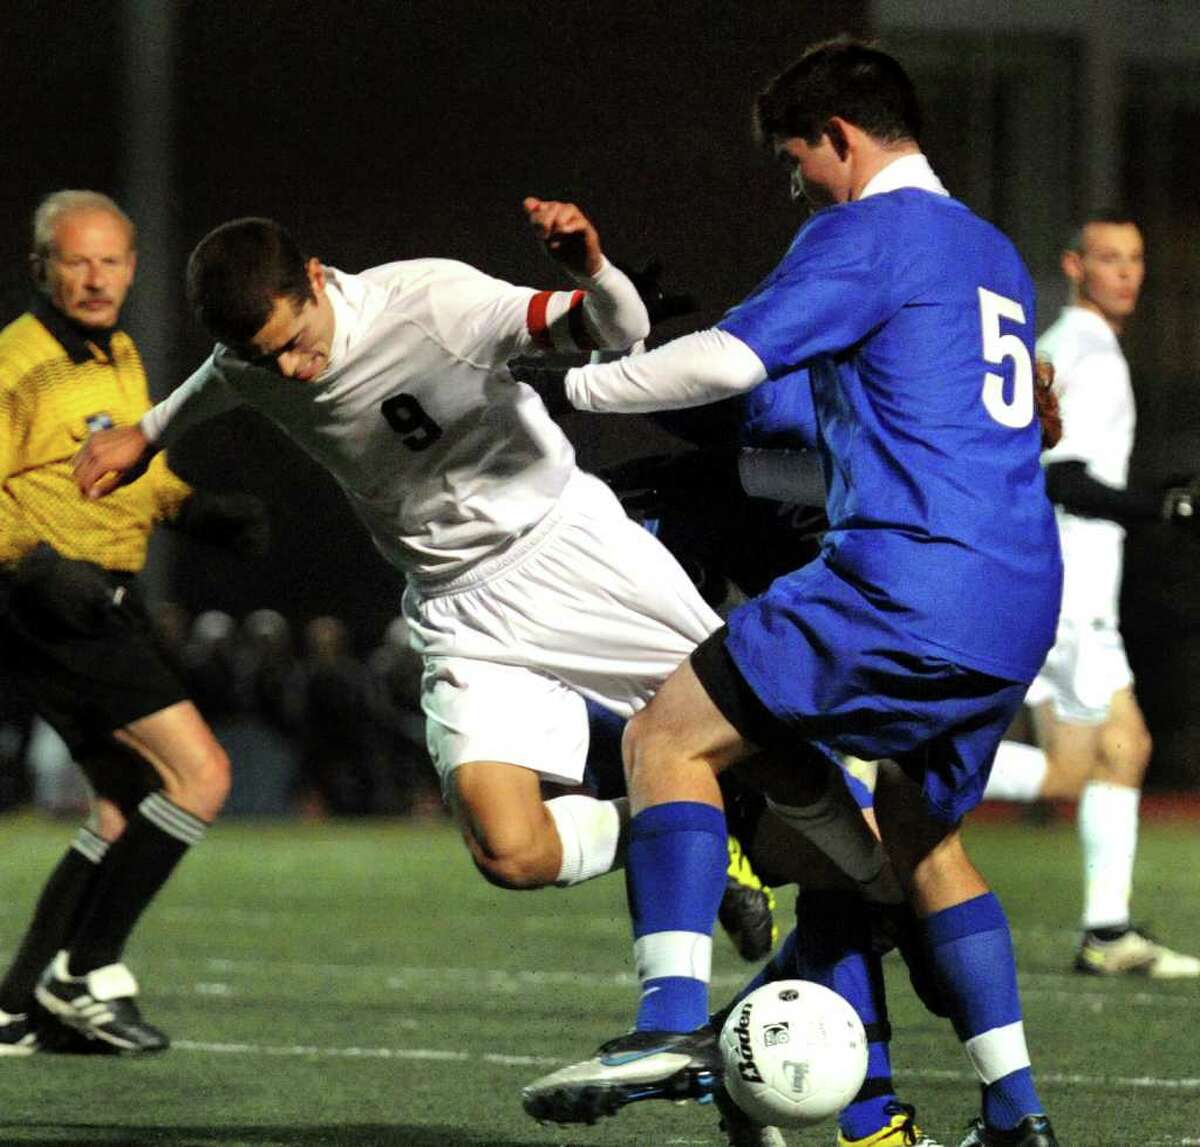 Highlights from FCIAC boys' soccer semi-finals action between Trumbull and Darien in Fairfield, Conn. on Wednesday November 2, 2011.